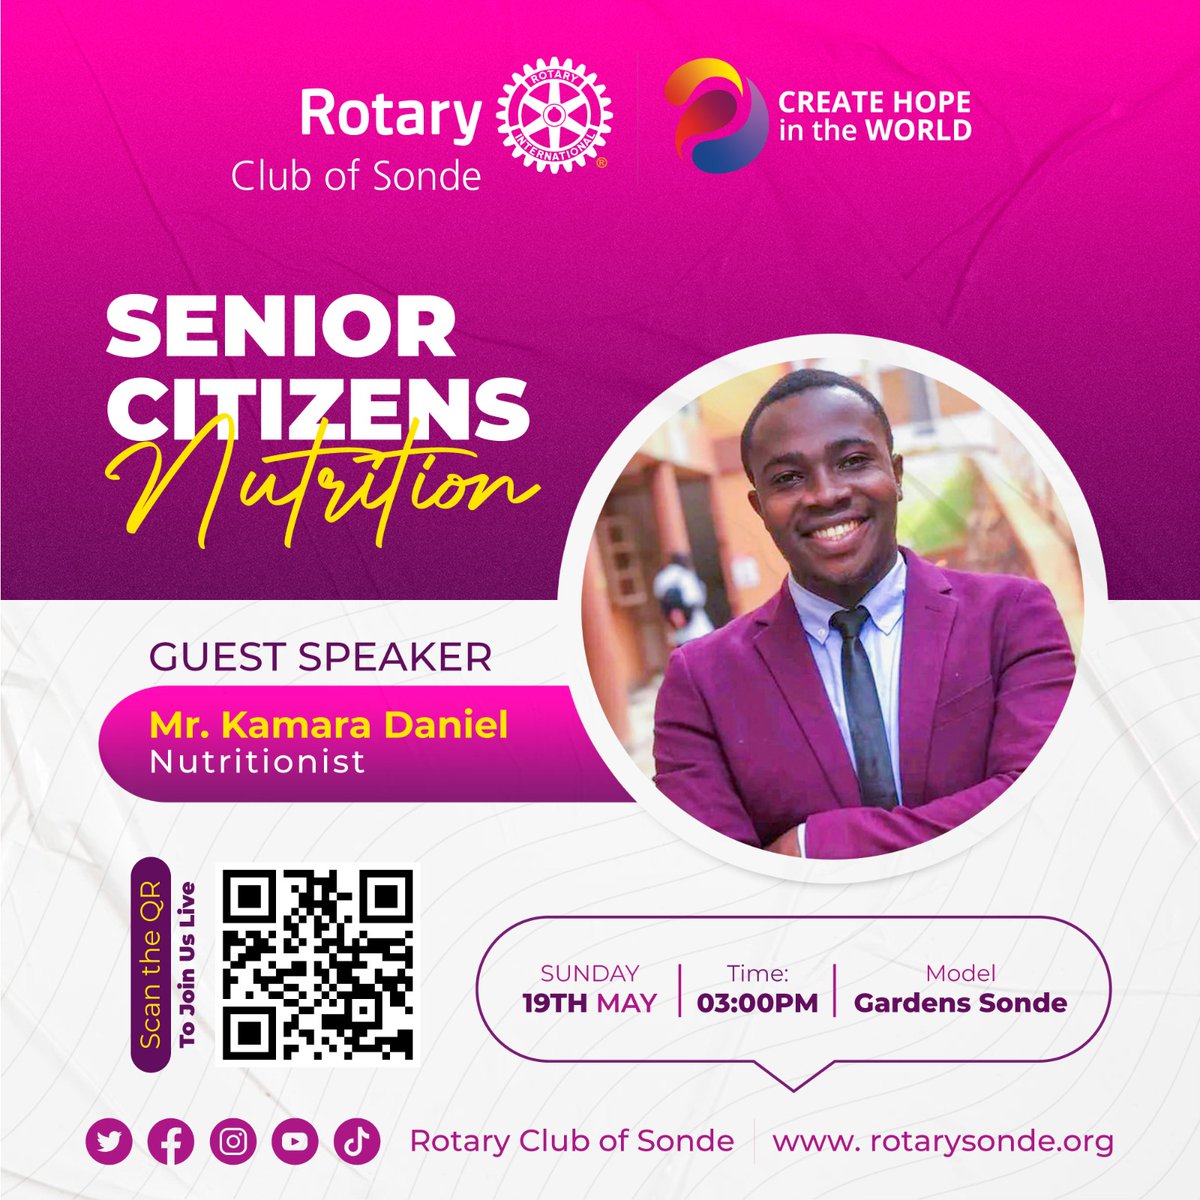 𝐃𝐞𝐚𝐫 𝐑𝐨𝐭𝐚𝐫𝐢𝐚𝐧𝐬, kindly join us this Sunday as we have a talk from Nutritionist Daniel Kamara 𝐓𝐨𝐩𝐢𝐜: Senior Citizen's Nutrition 𝐃𝐚𝐭𝐞: May 19, 2024 𝐓𝐢𝐦𝐞: 03:00 PM Nairobi 03:00 PM Nairobi 12:00 PM GMT 05:30 PM India Time 06:00 AM Central Time, USA